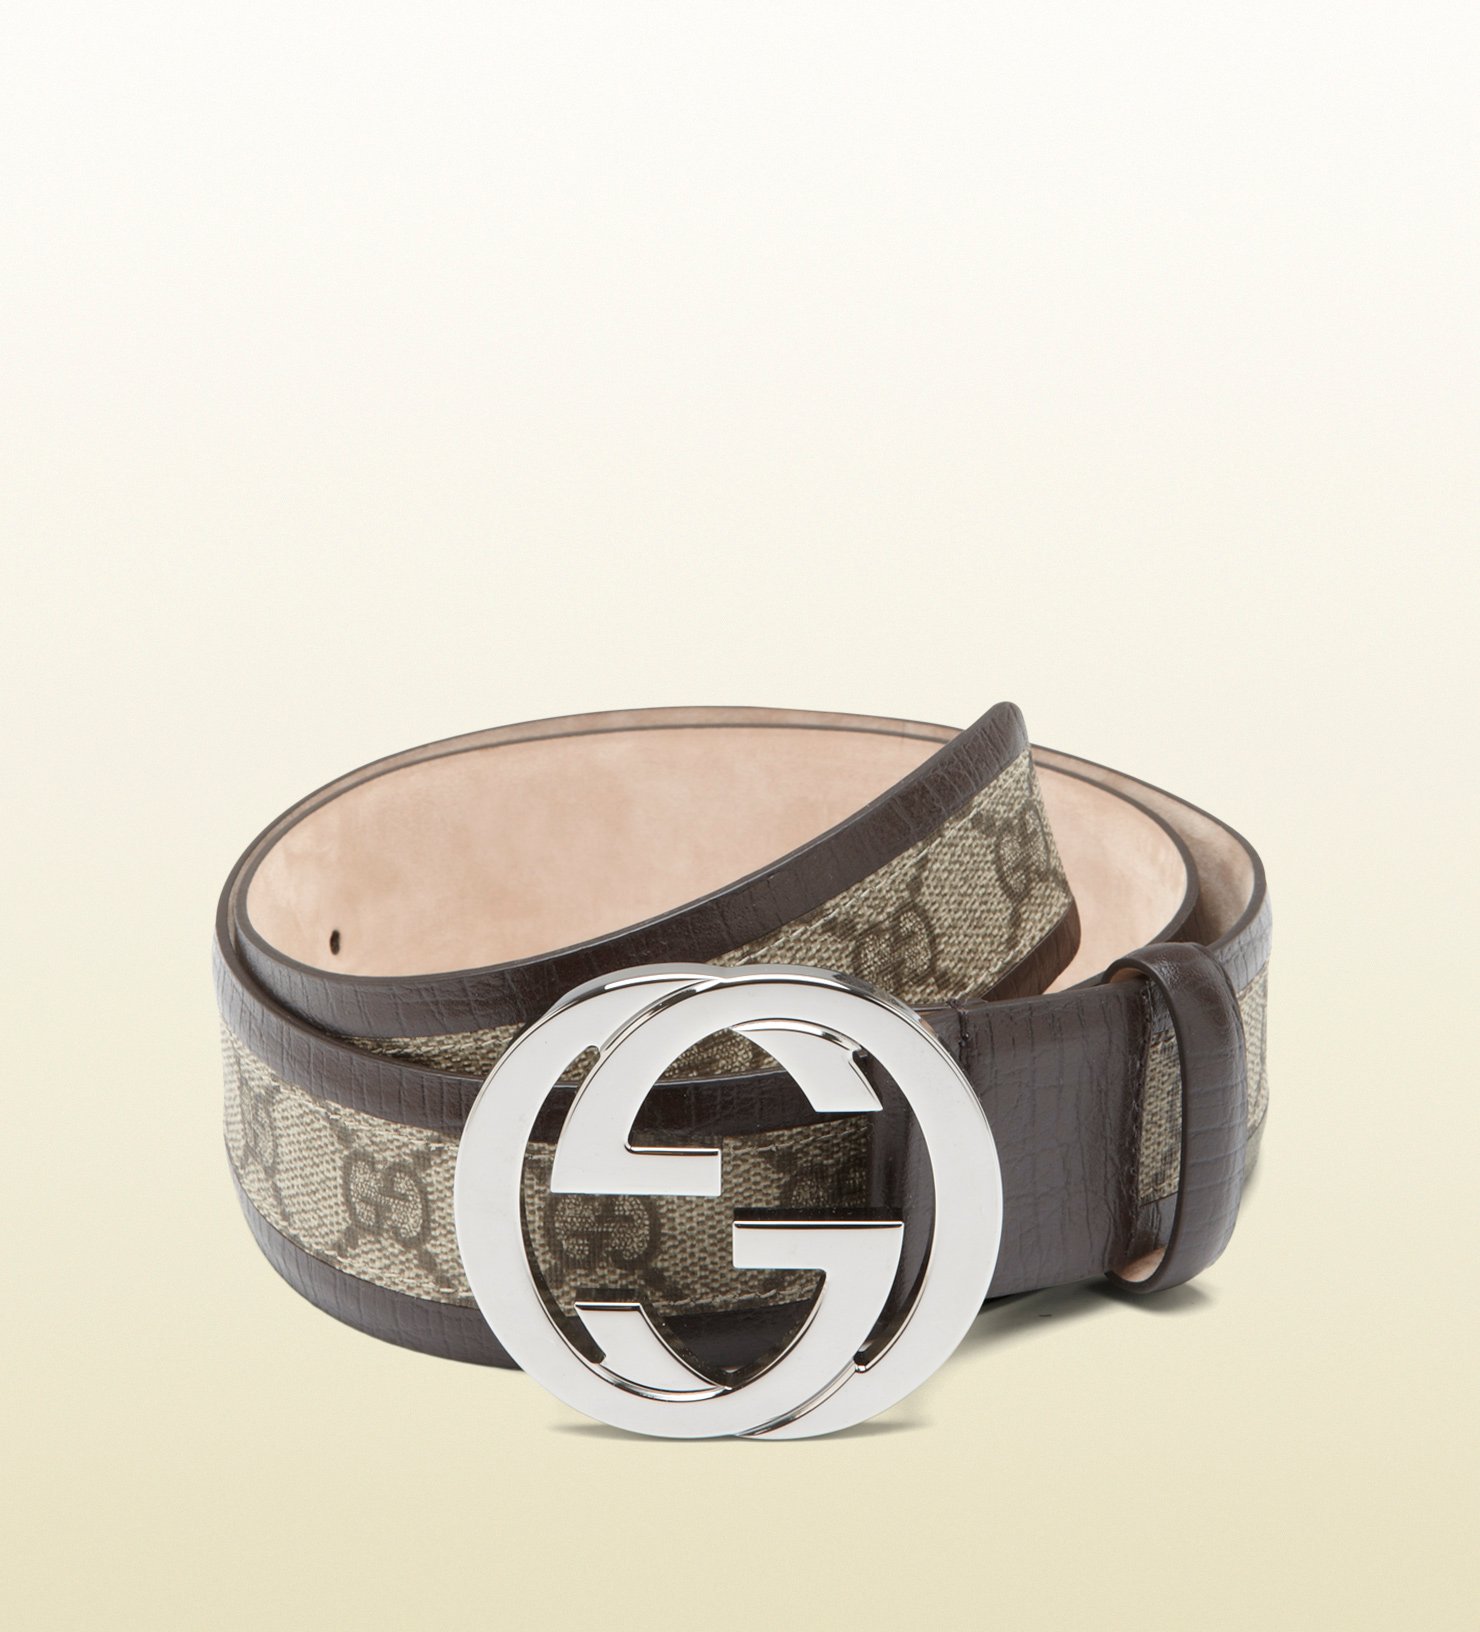 Lyst - Gucci Belt With Interlocking G Buckle in Natural for Men